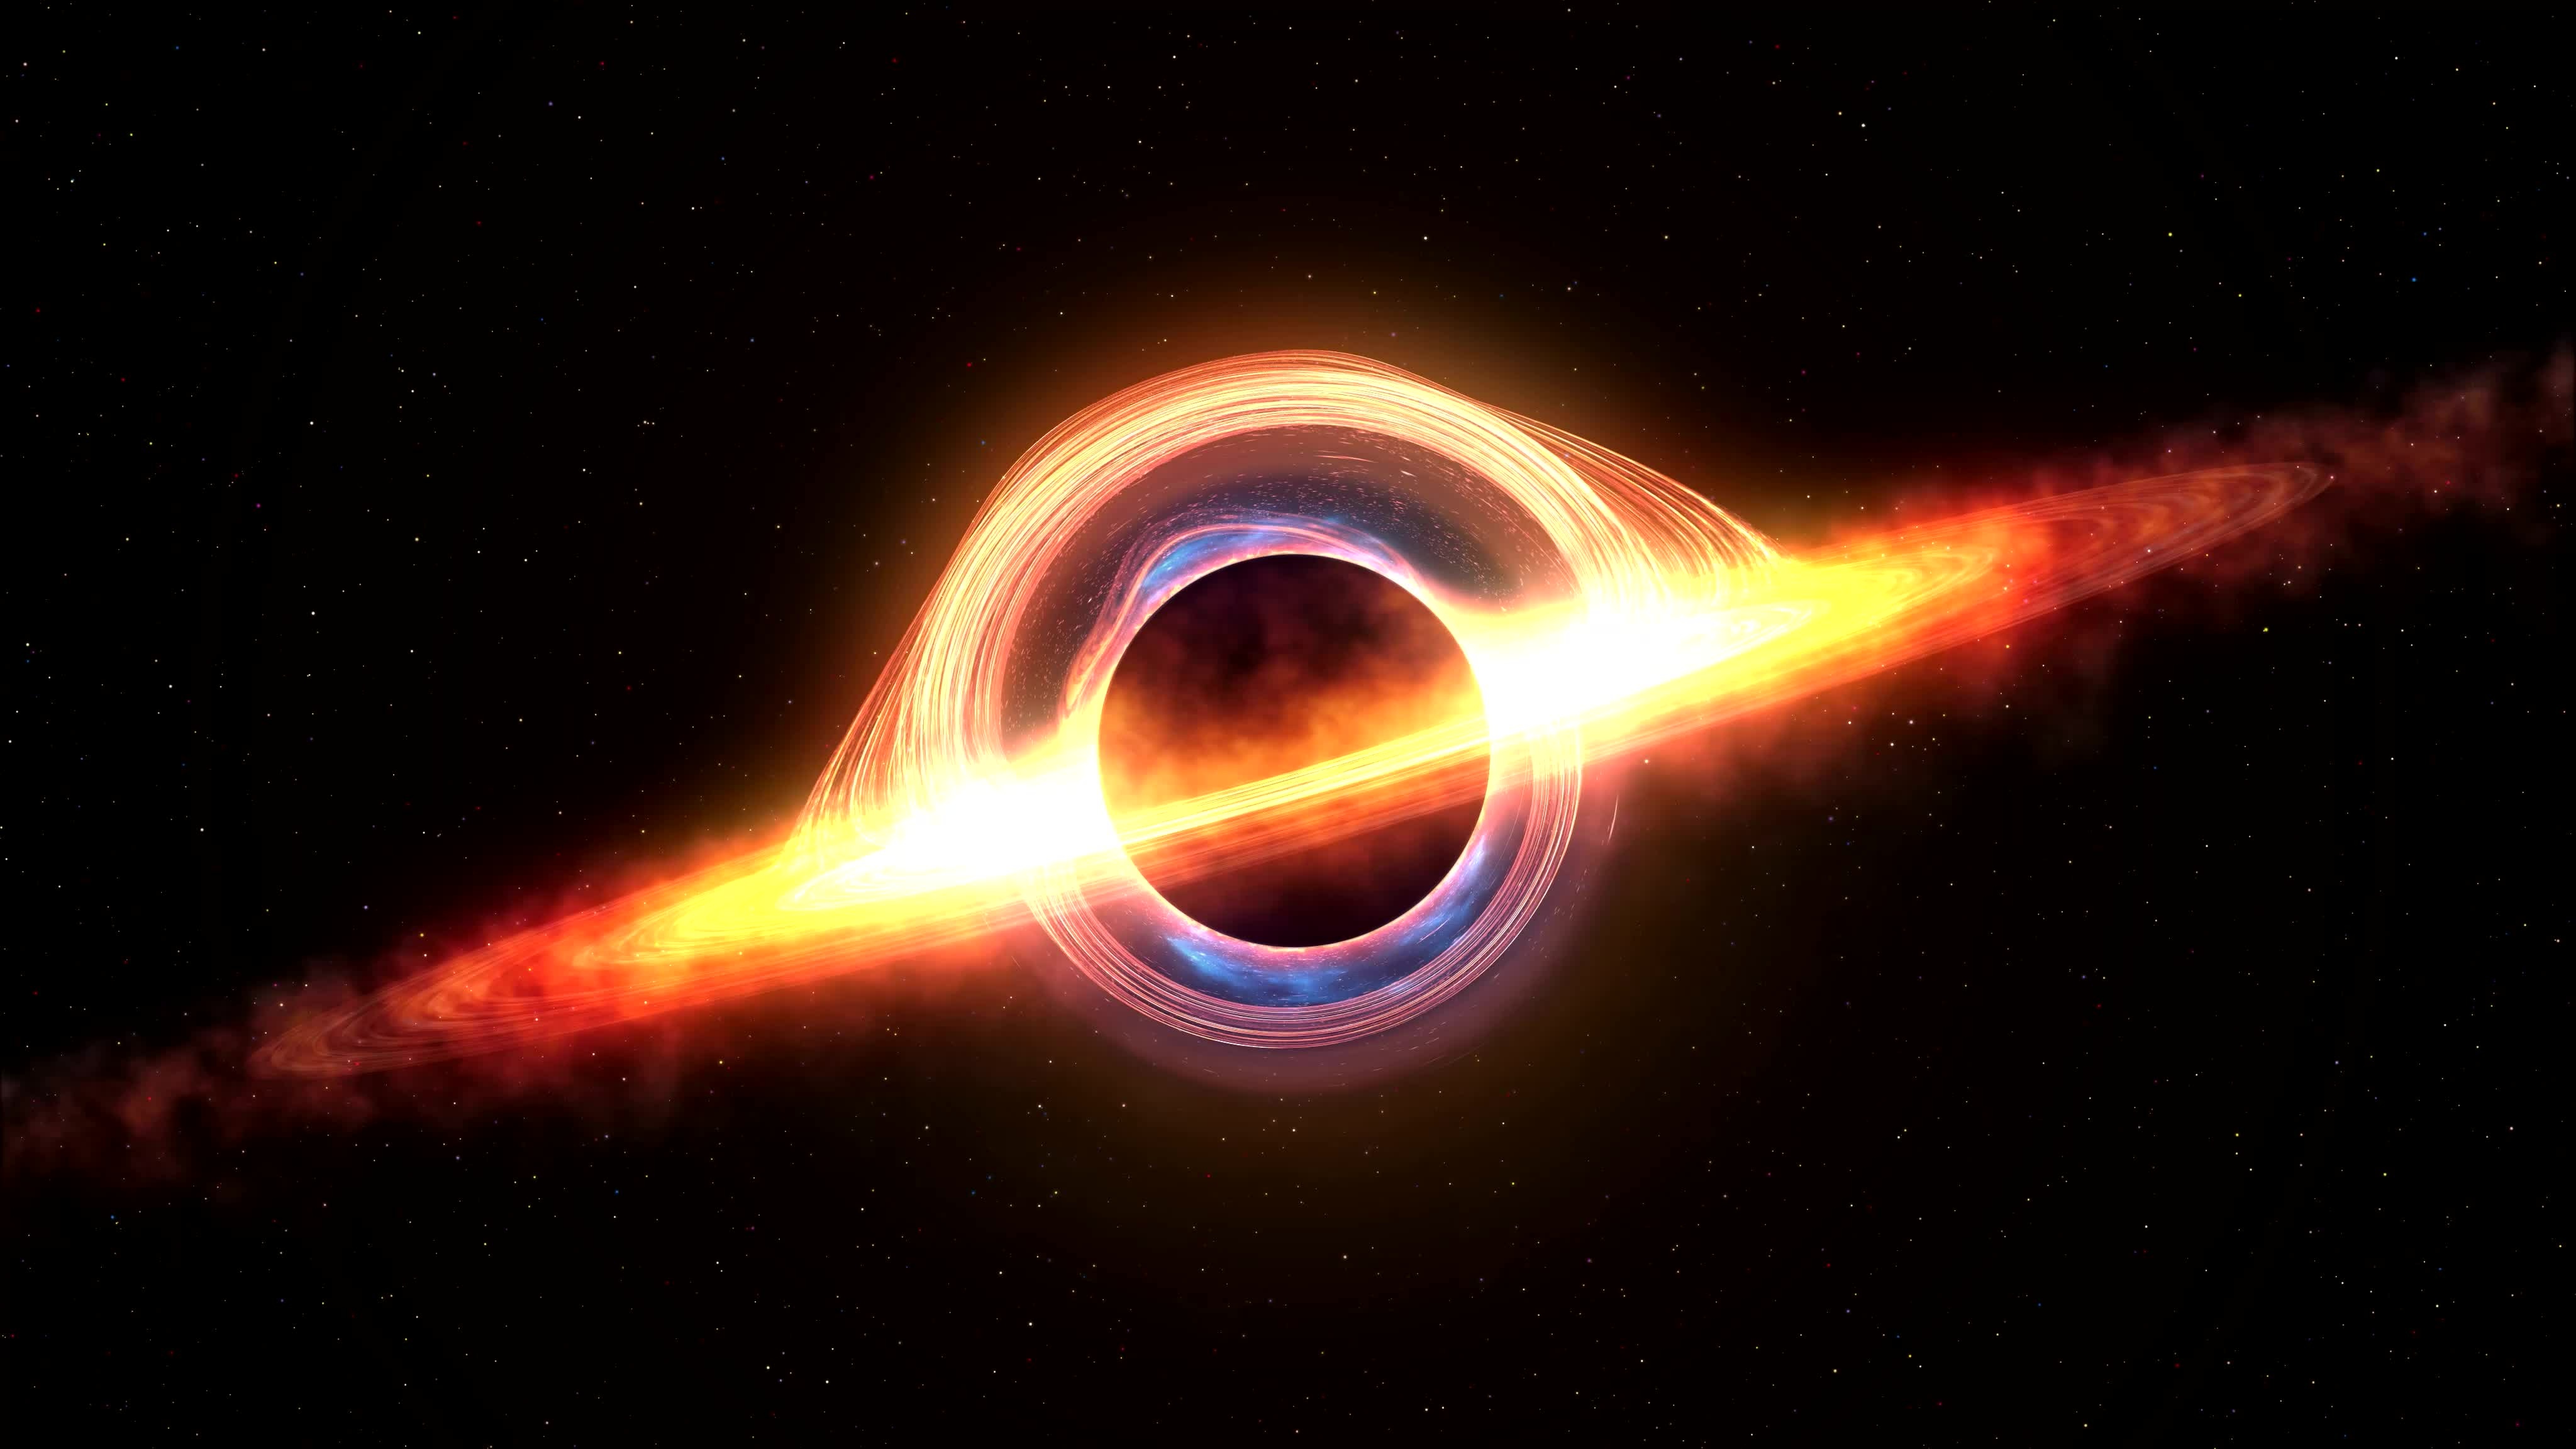 A Scientist Made An Artificial Black Hole In The Lab, And You Won’t Believe What Happened Next